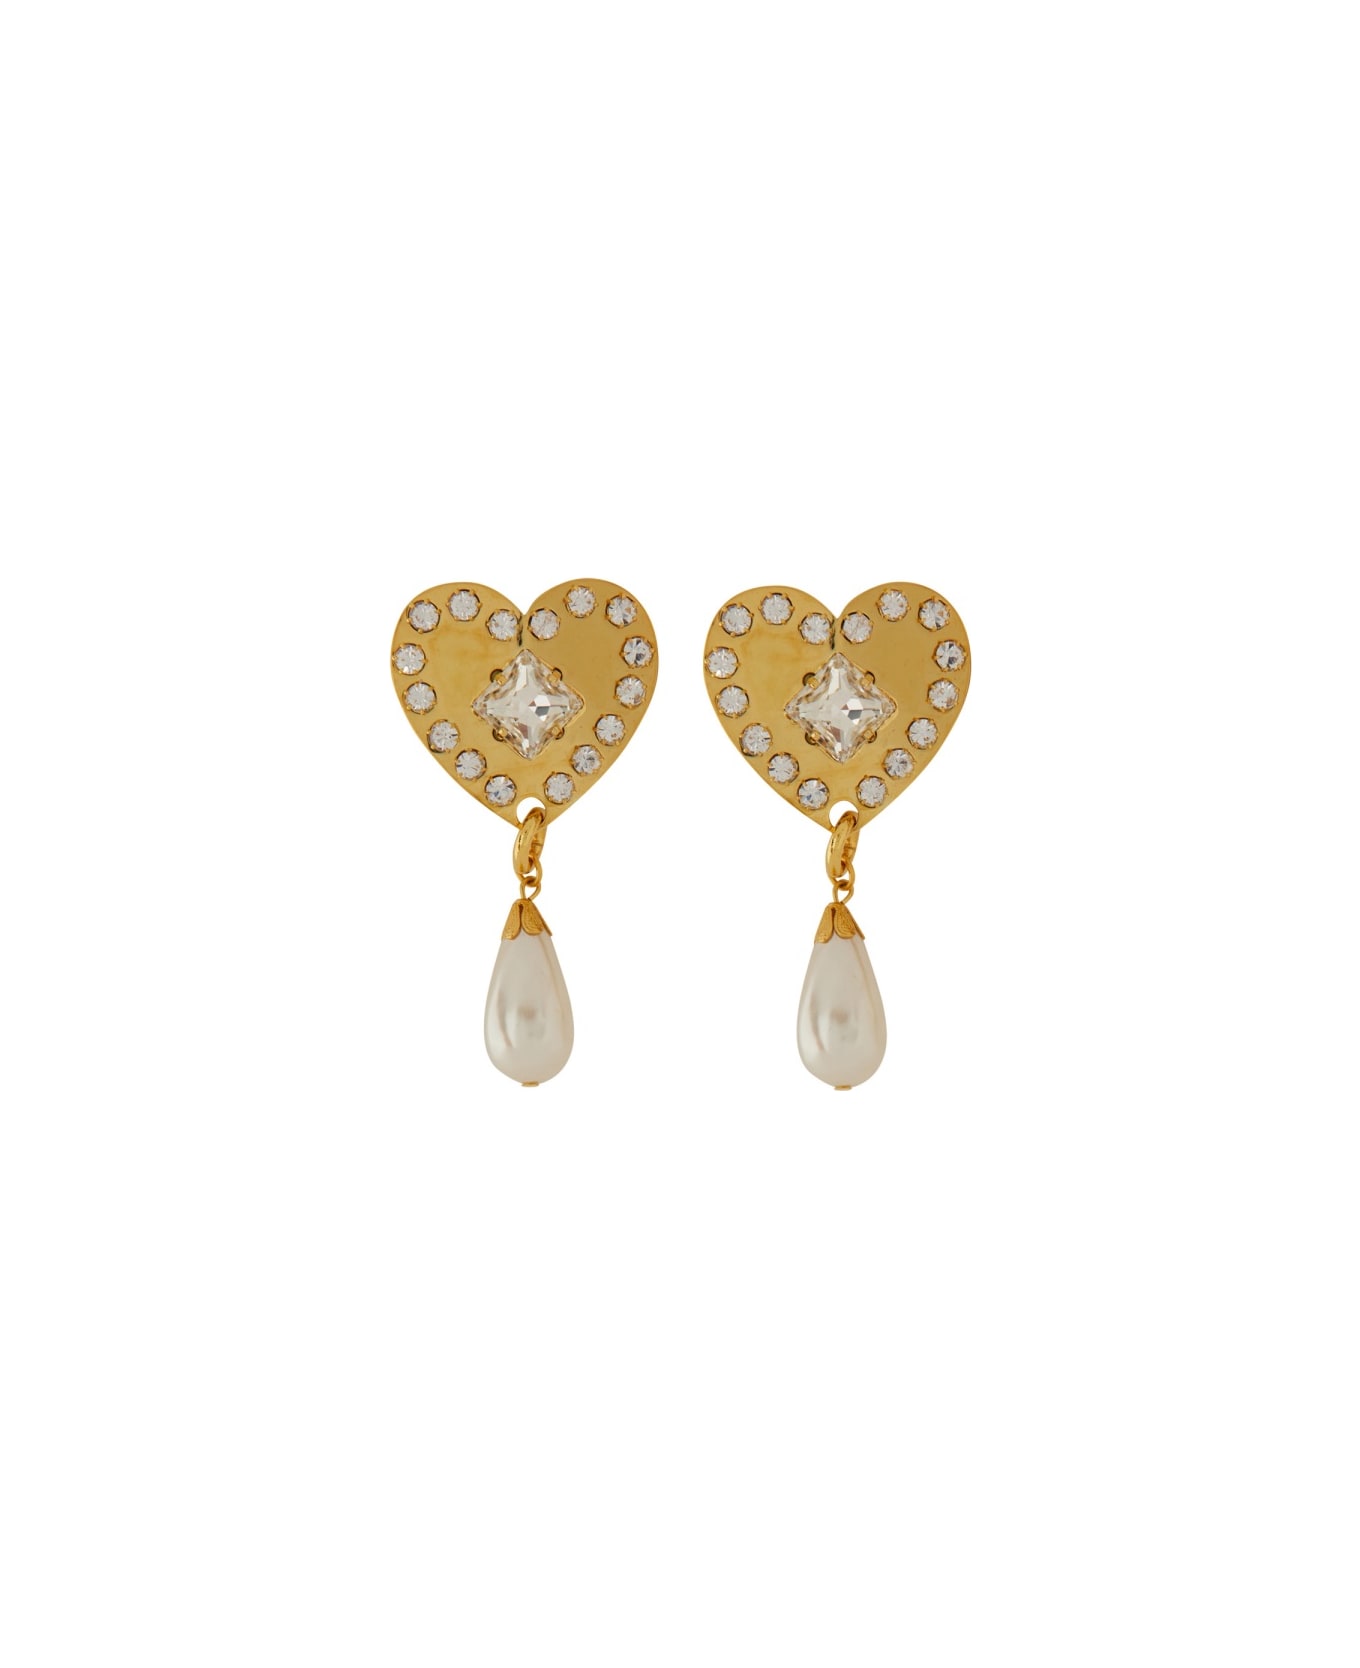 Alessandra Rich Metal Heart Earrings With Crystals - GOLD